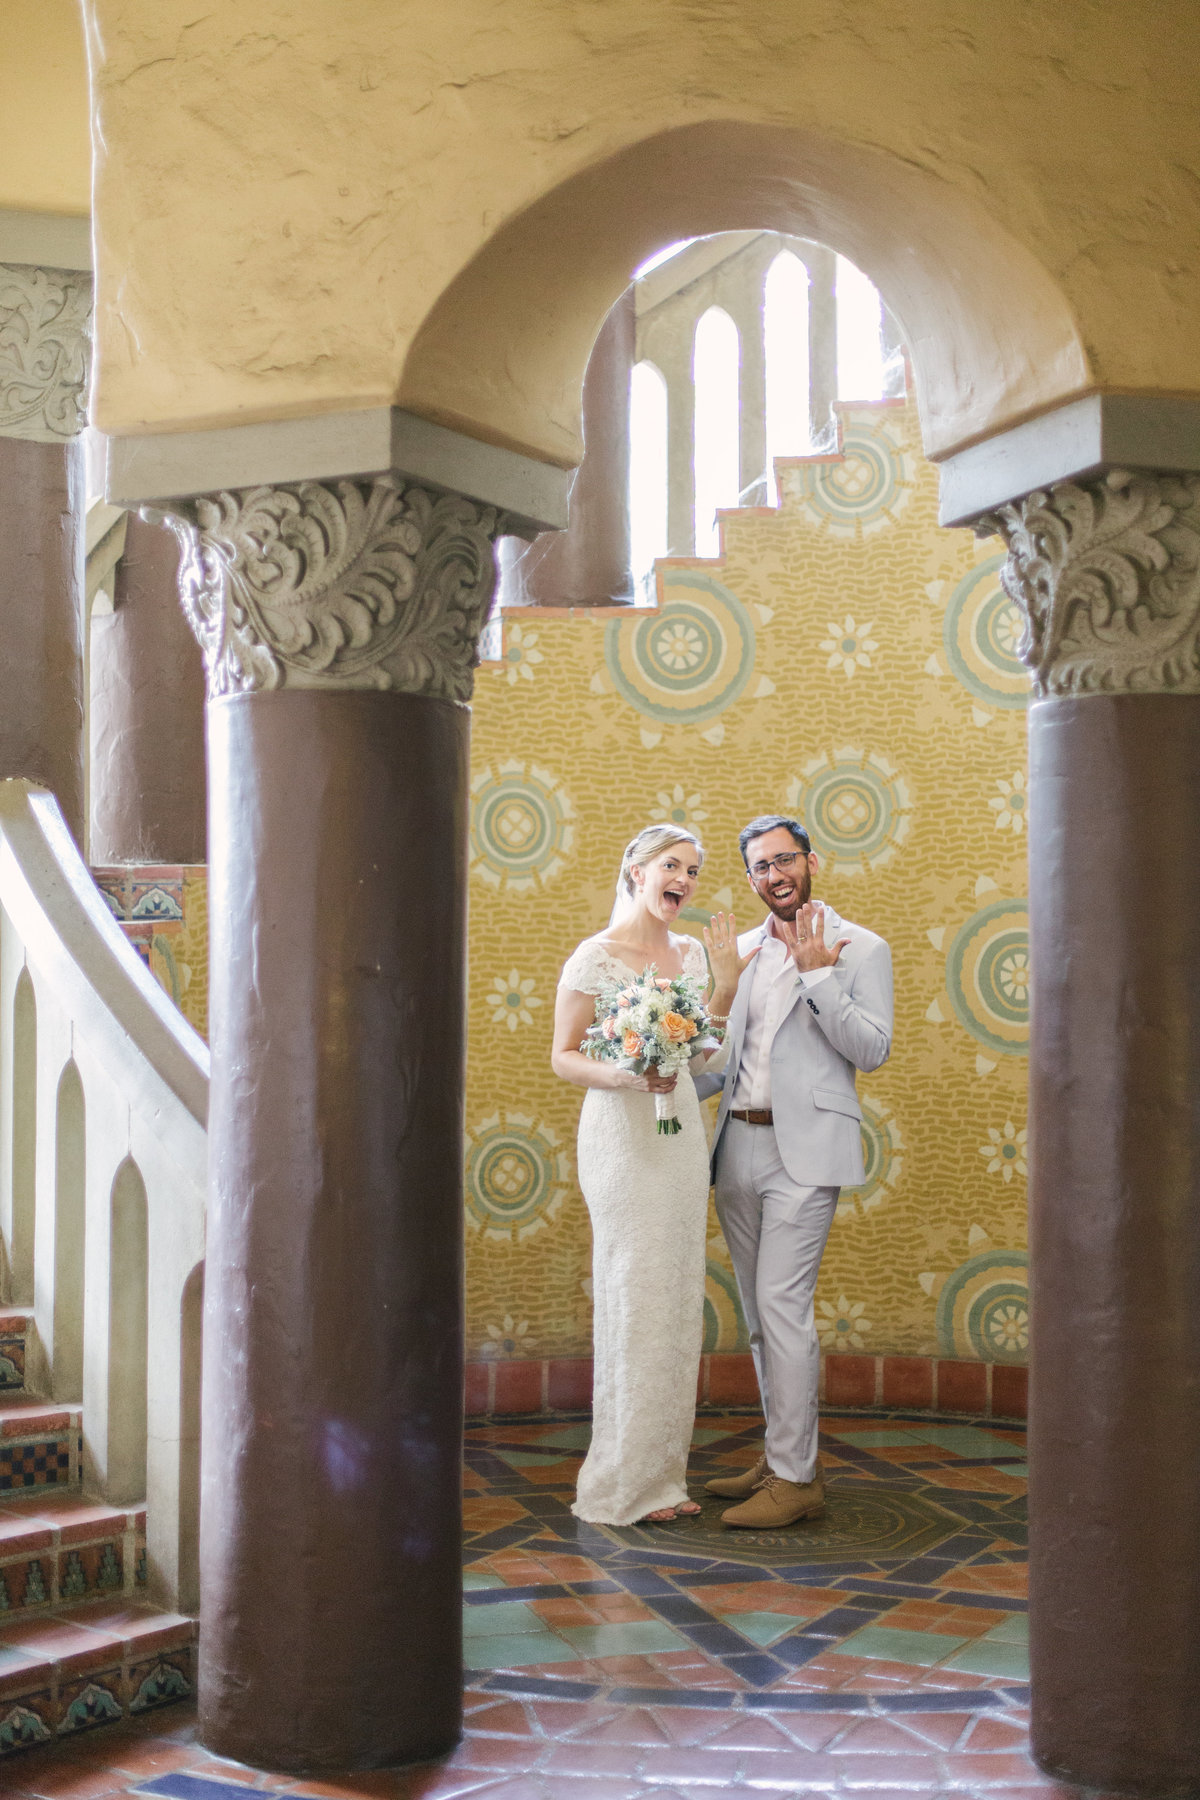 Bride and groom show off their rings at Santa Barbara Courthouse wedding